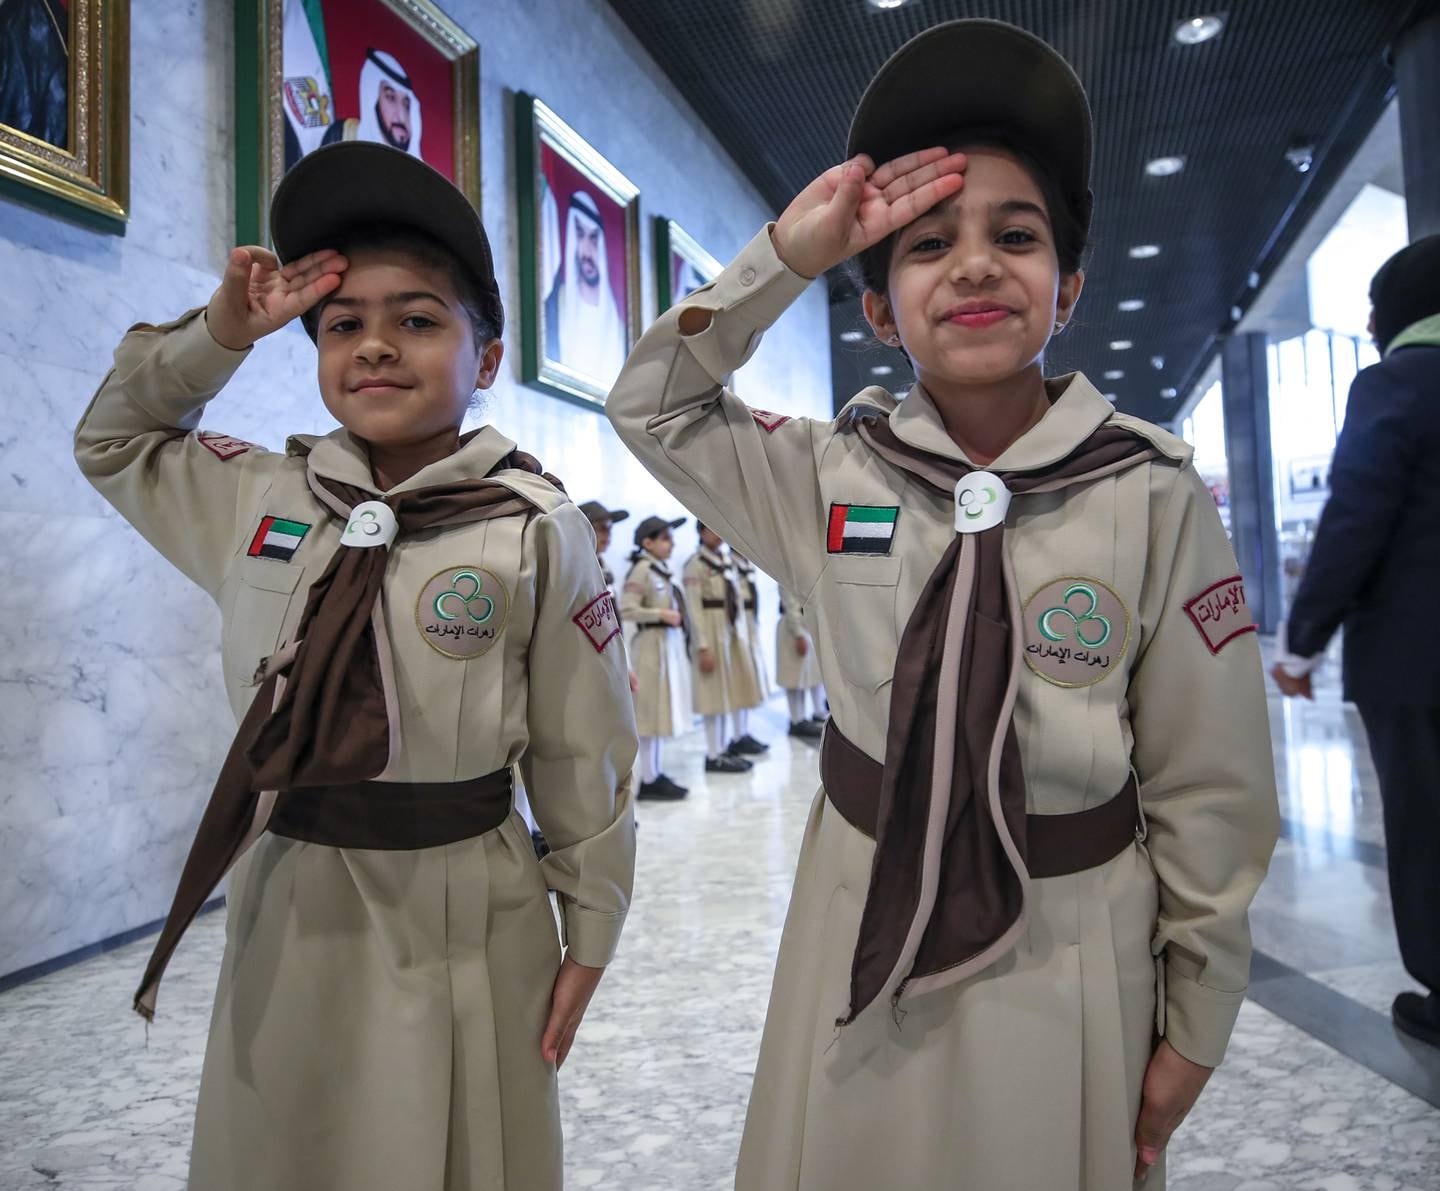 Nouf Abdul Salam, 9, and Wufa Ahmed, 9, welcomed guests to the 23rd Arab Regional Conference. Victor Bessa/The National